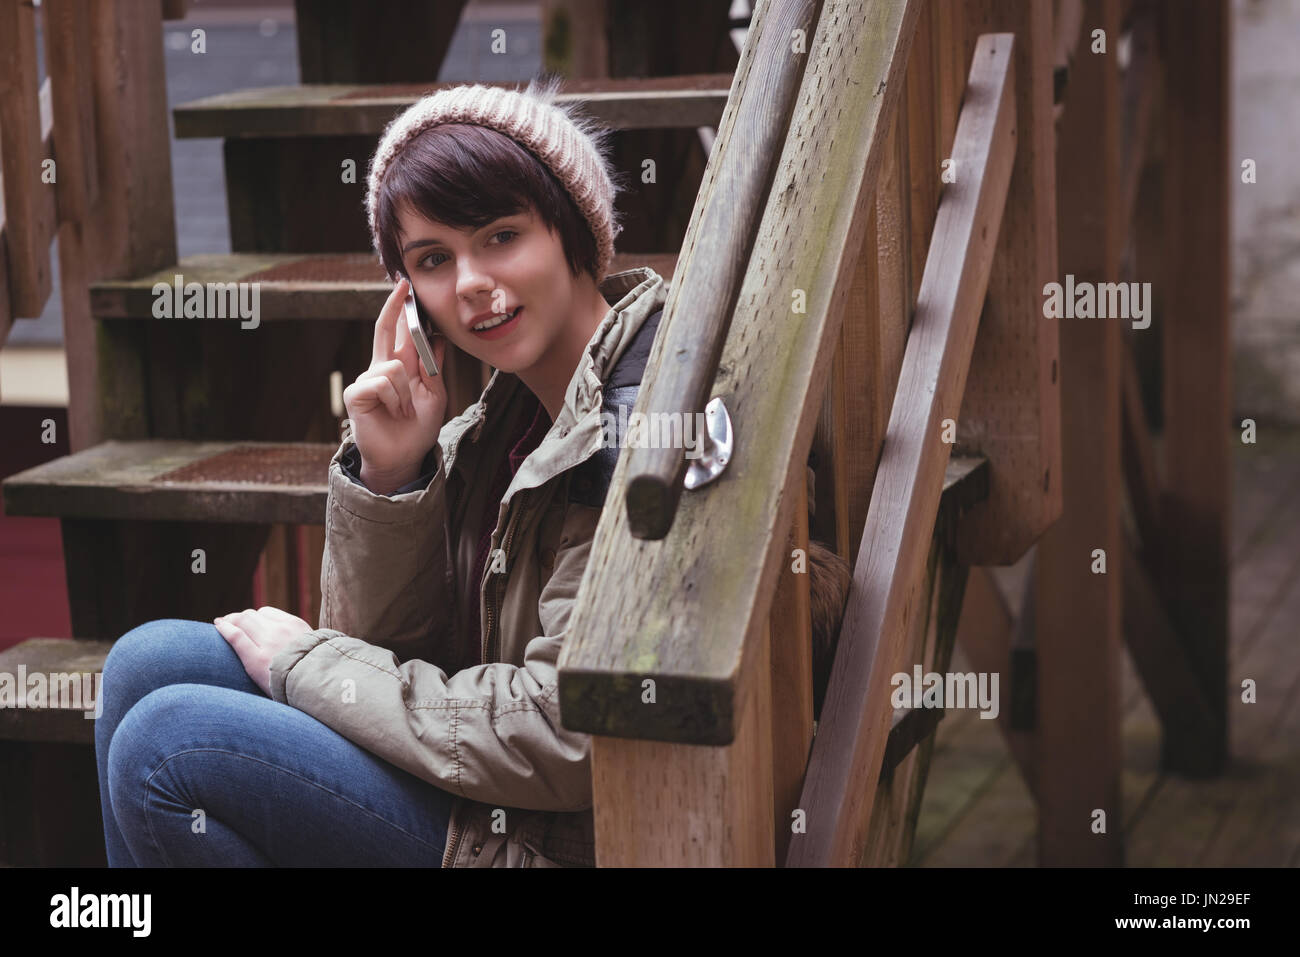 Woman talking on mobile phone while sitting on stairs Stock Photo